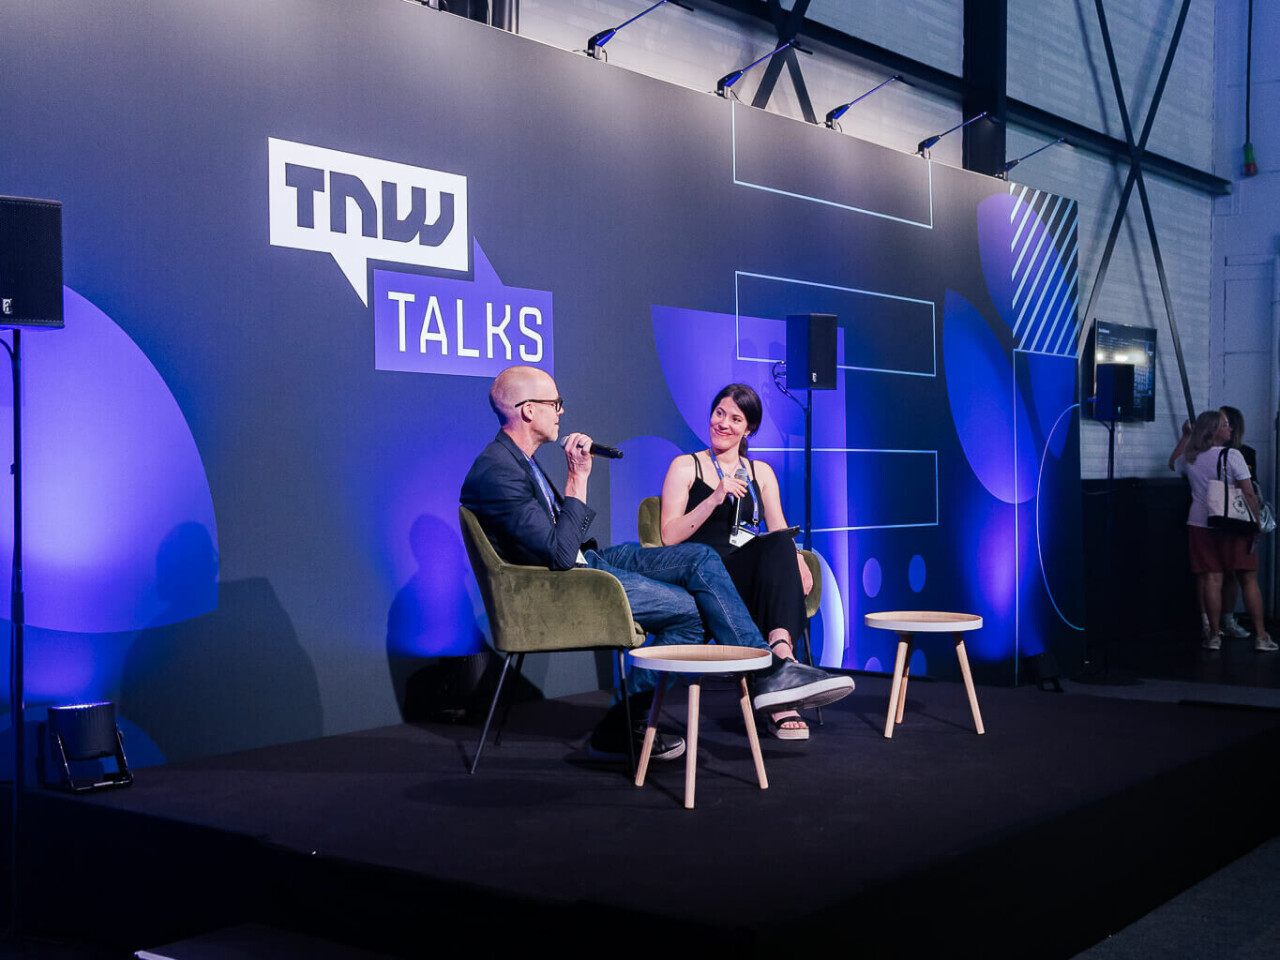 Why TNW Conference?